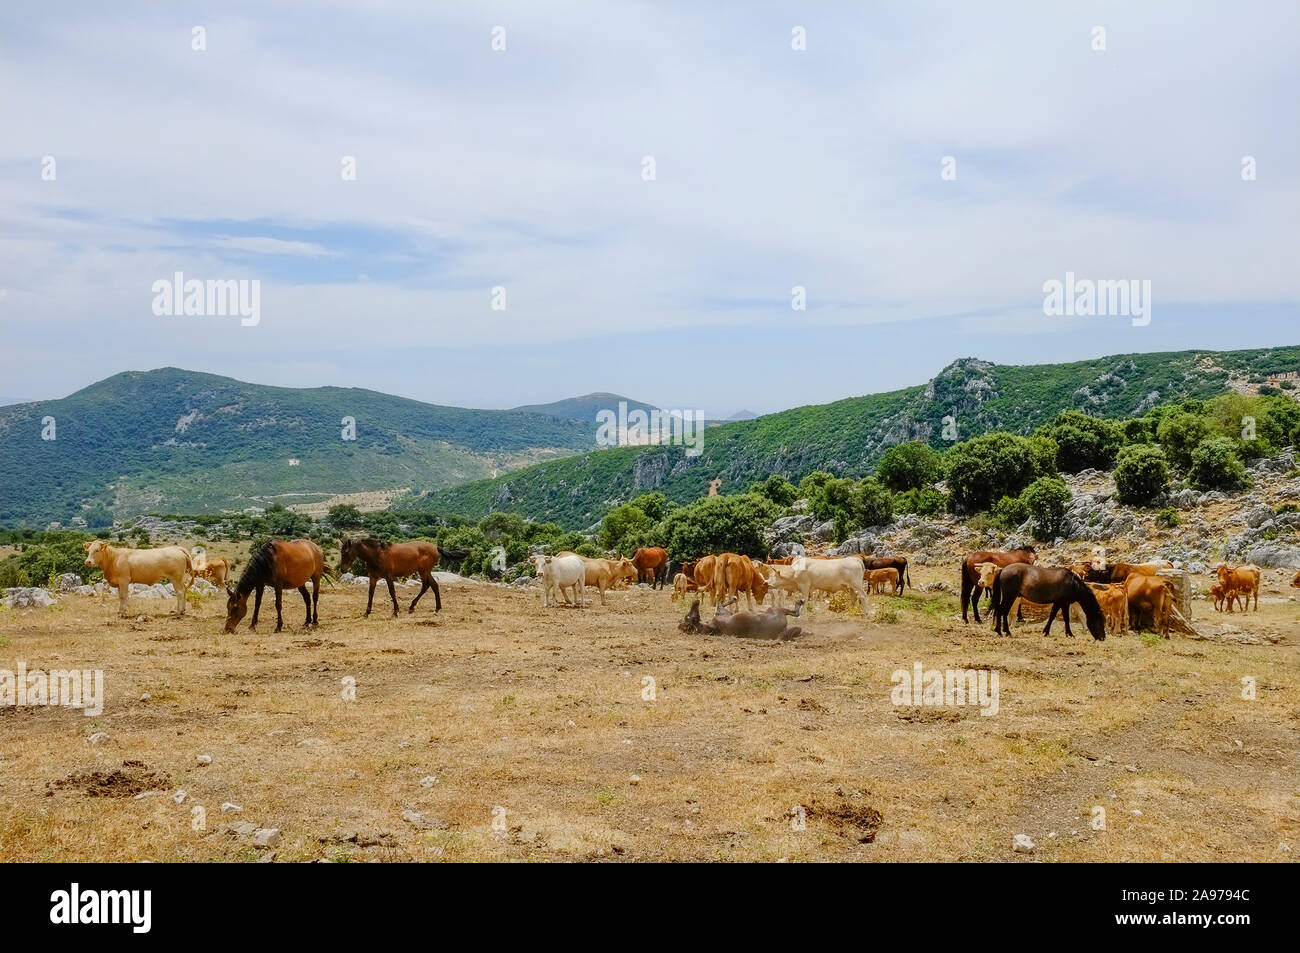 Horses grazing on the high plateau at Navazuelo, Sierra Subbetica, Cordoba Province, Andalucia, Spain Stock Photo